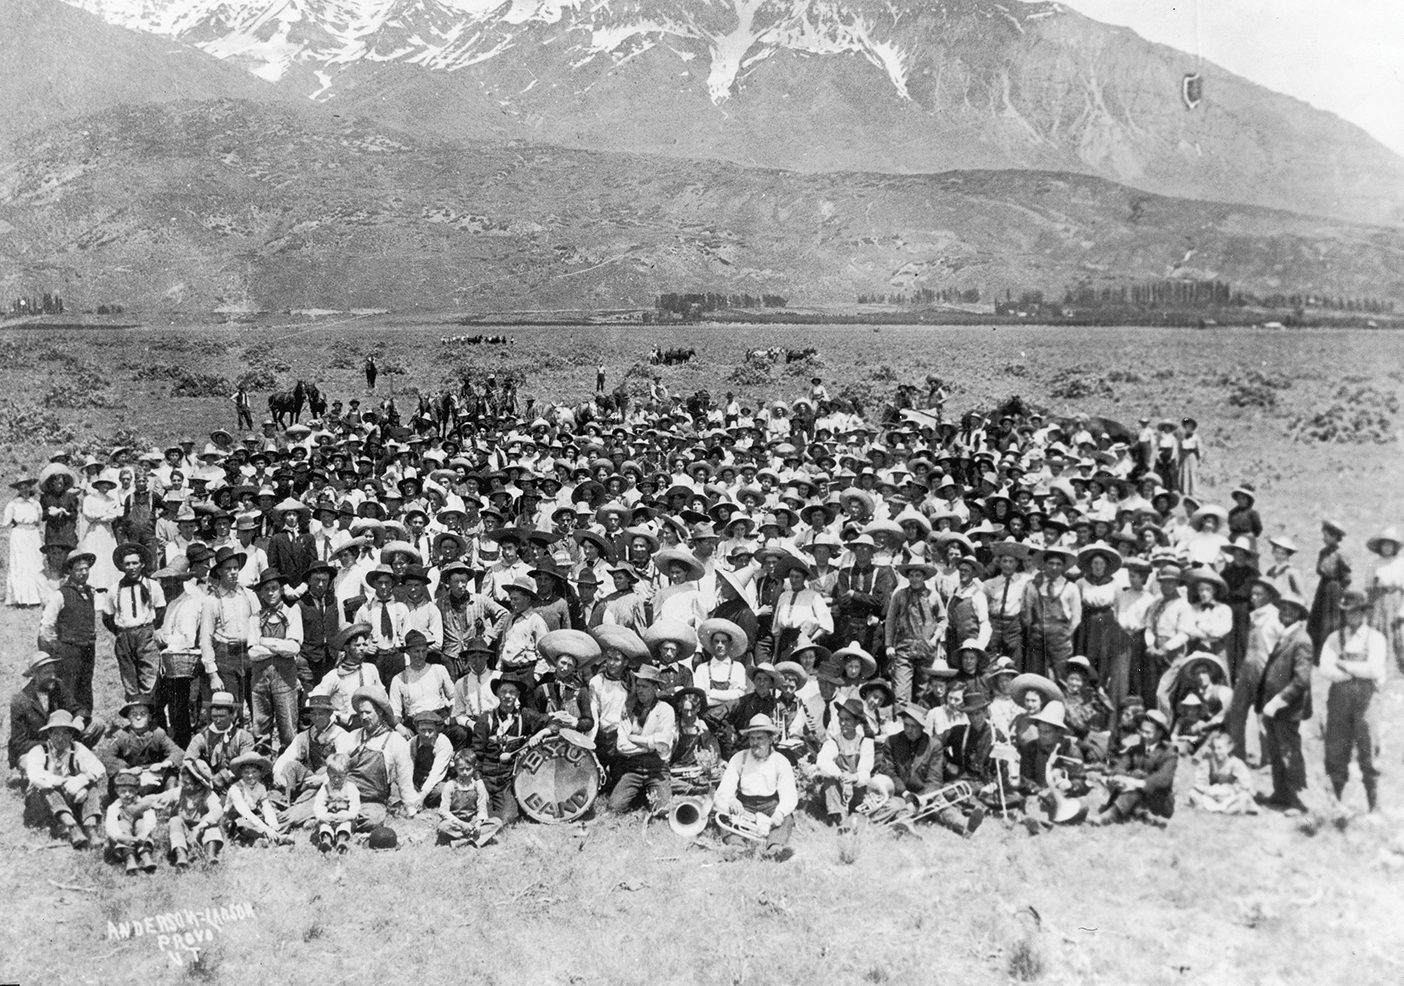 A black and white photo of a large group of students from 1907 dressed as cowboys after clearing out sagebrush from Orem. They pose in a large section of empty land in front of a mountain.